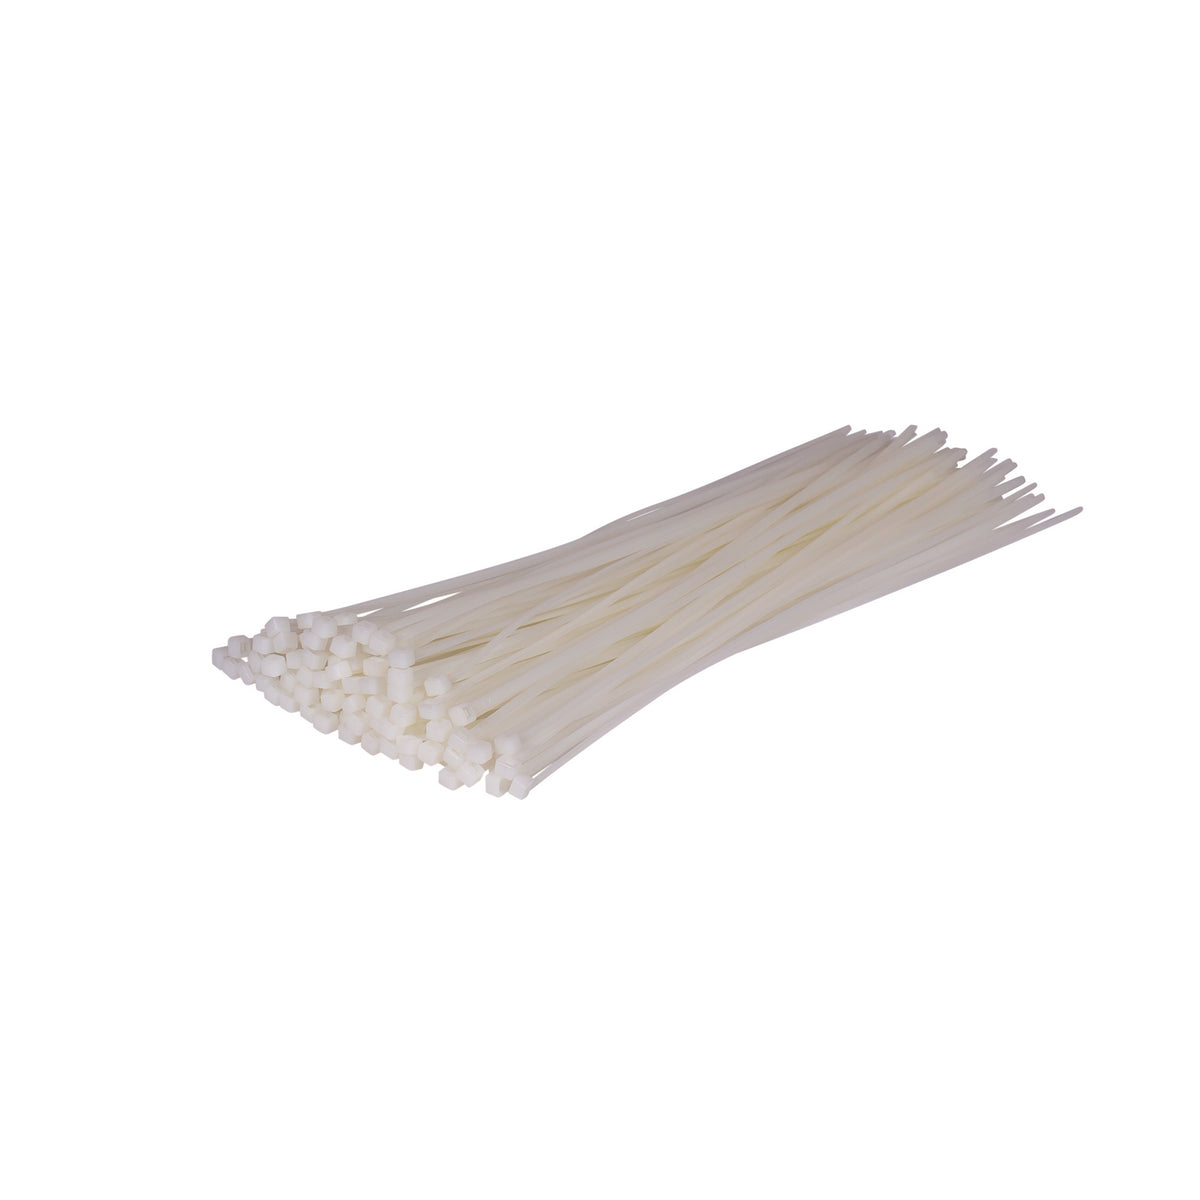 Cable Ties Neutral - 300 mm x 4.8 mm